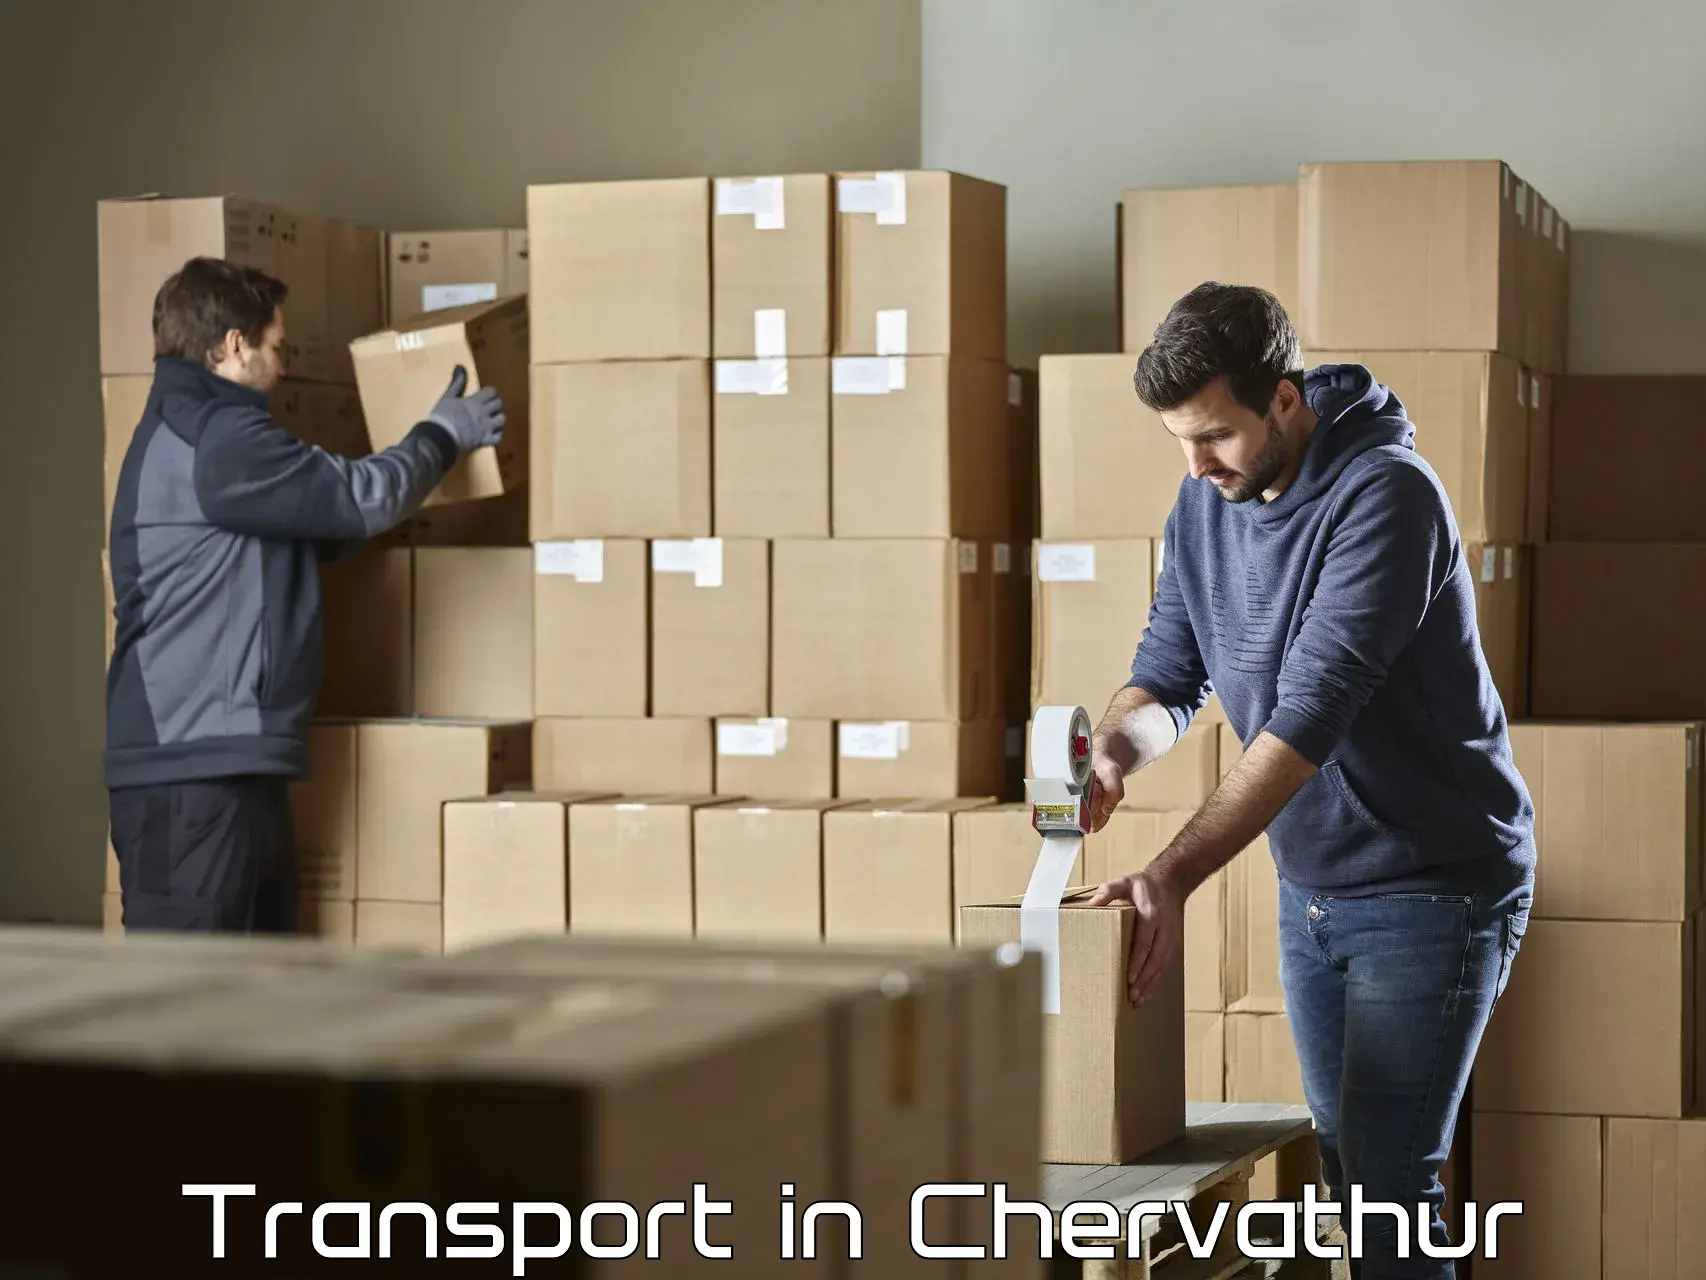 Container transportation services in Chervathur